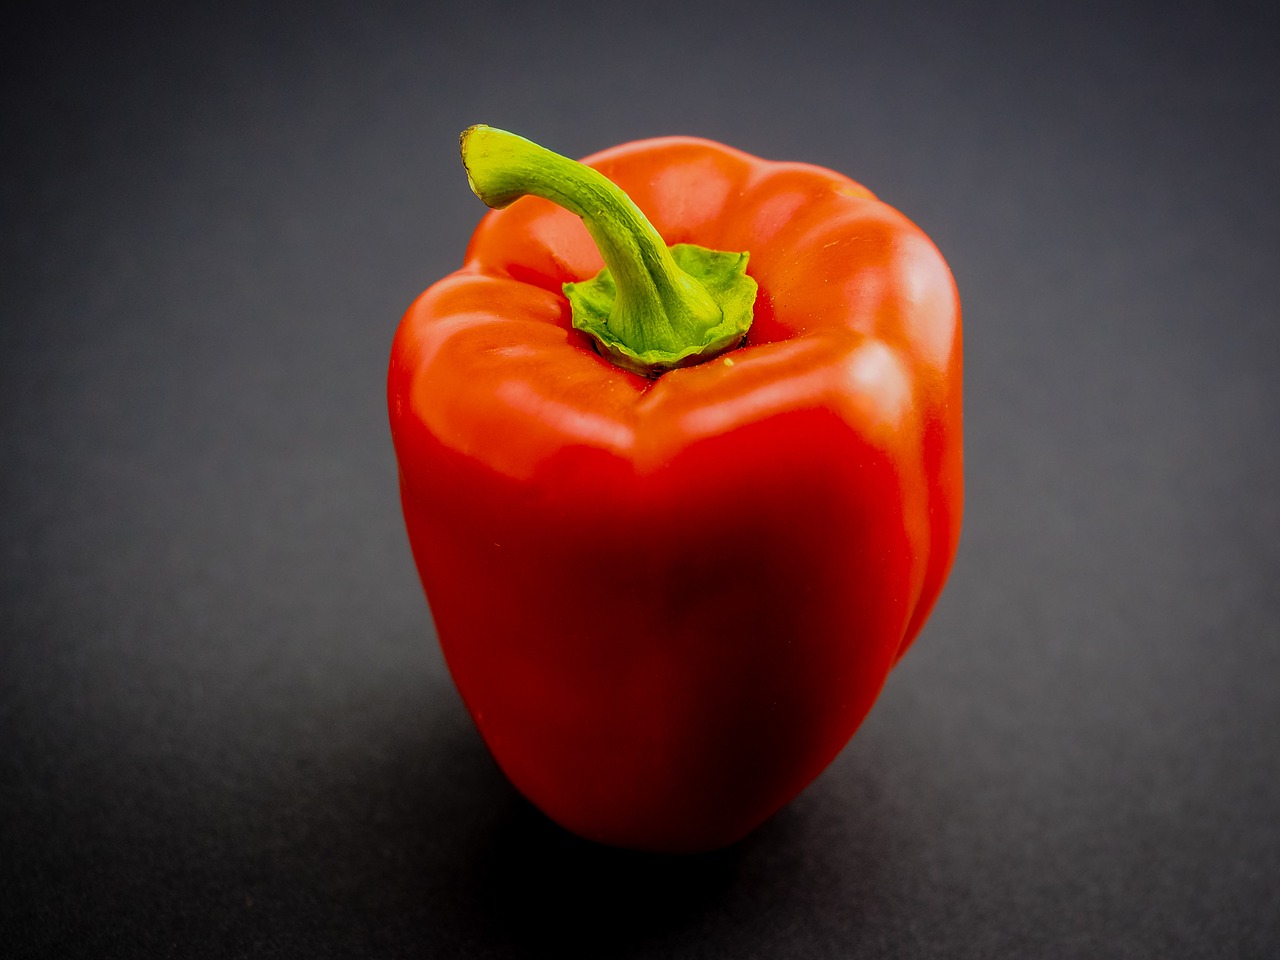 red pepper paprika vegetables free photo